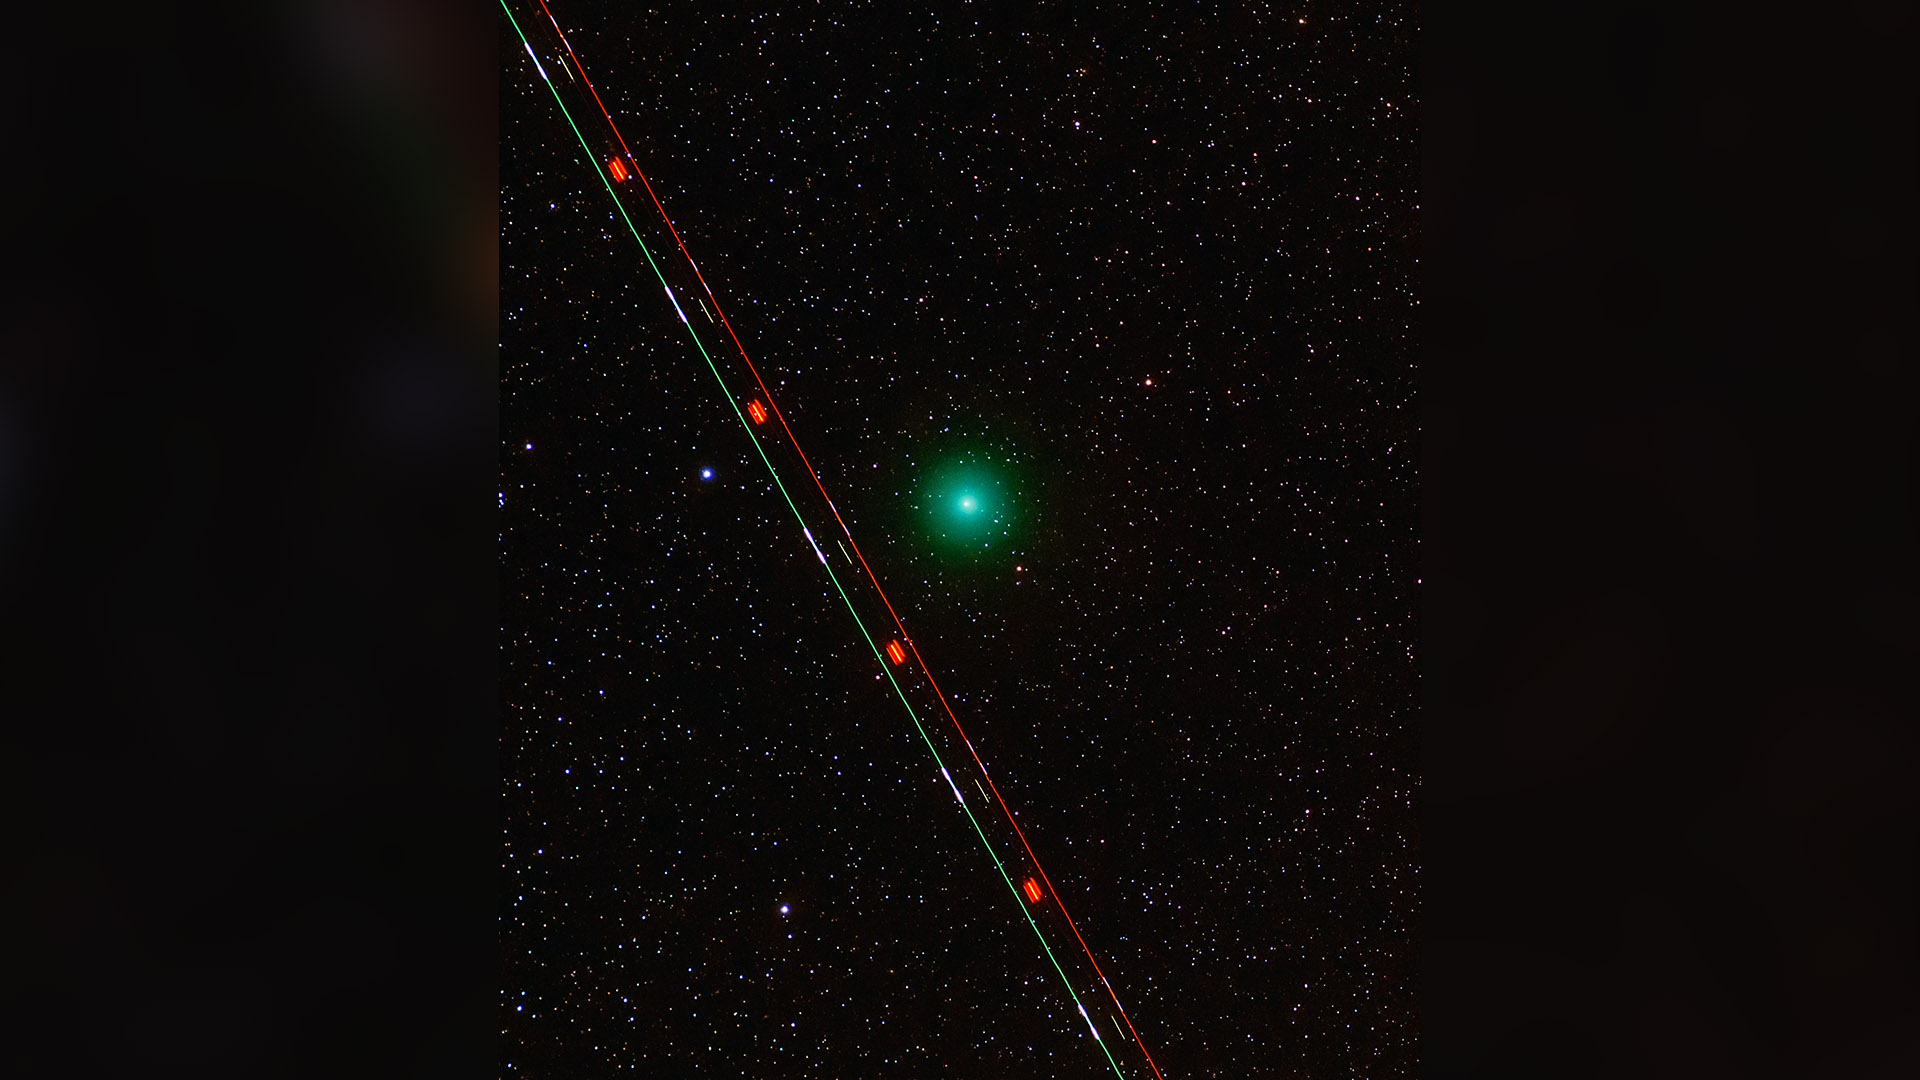 A 2019 image of comet 46P/Wirtanen and a commercial plane moving over Paranal Observatory in Chile.